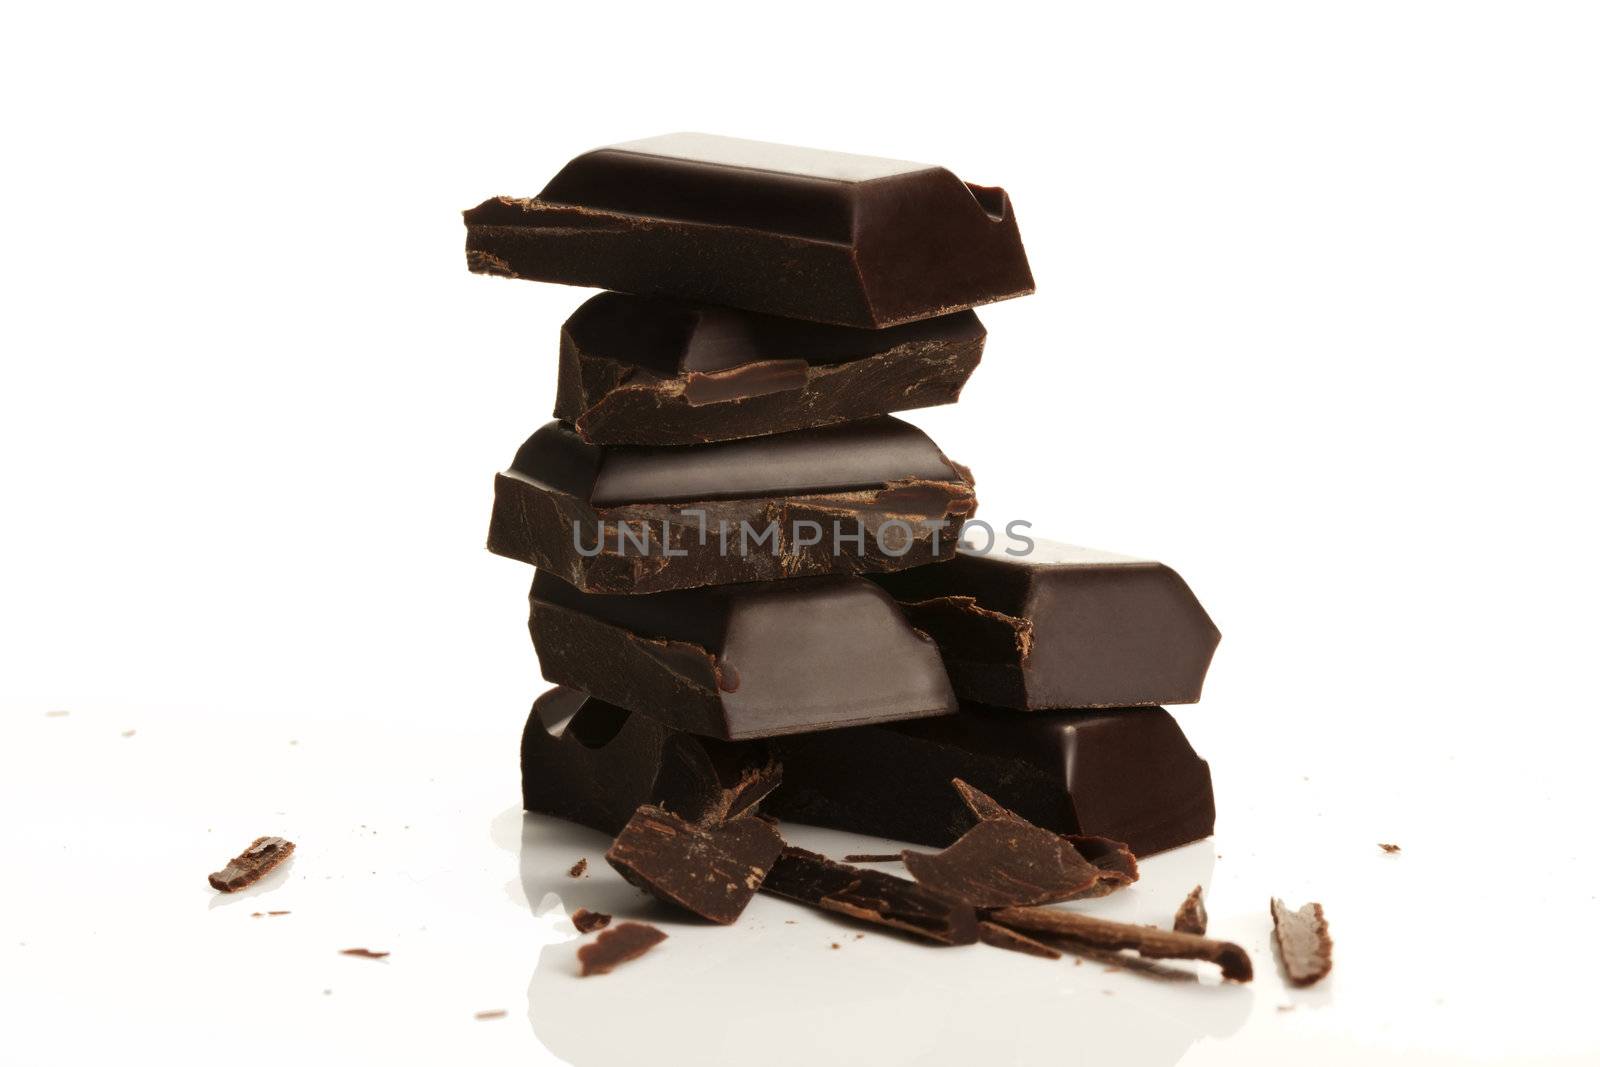 stack of plain chocolate on white background